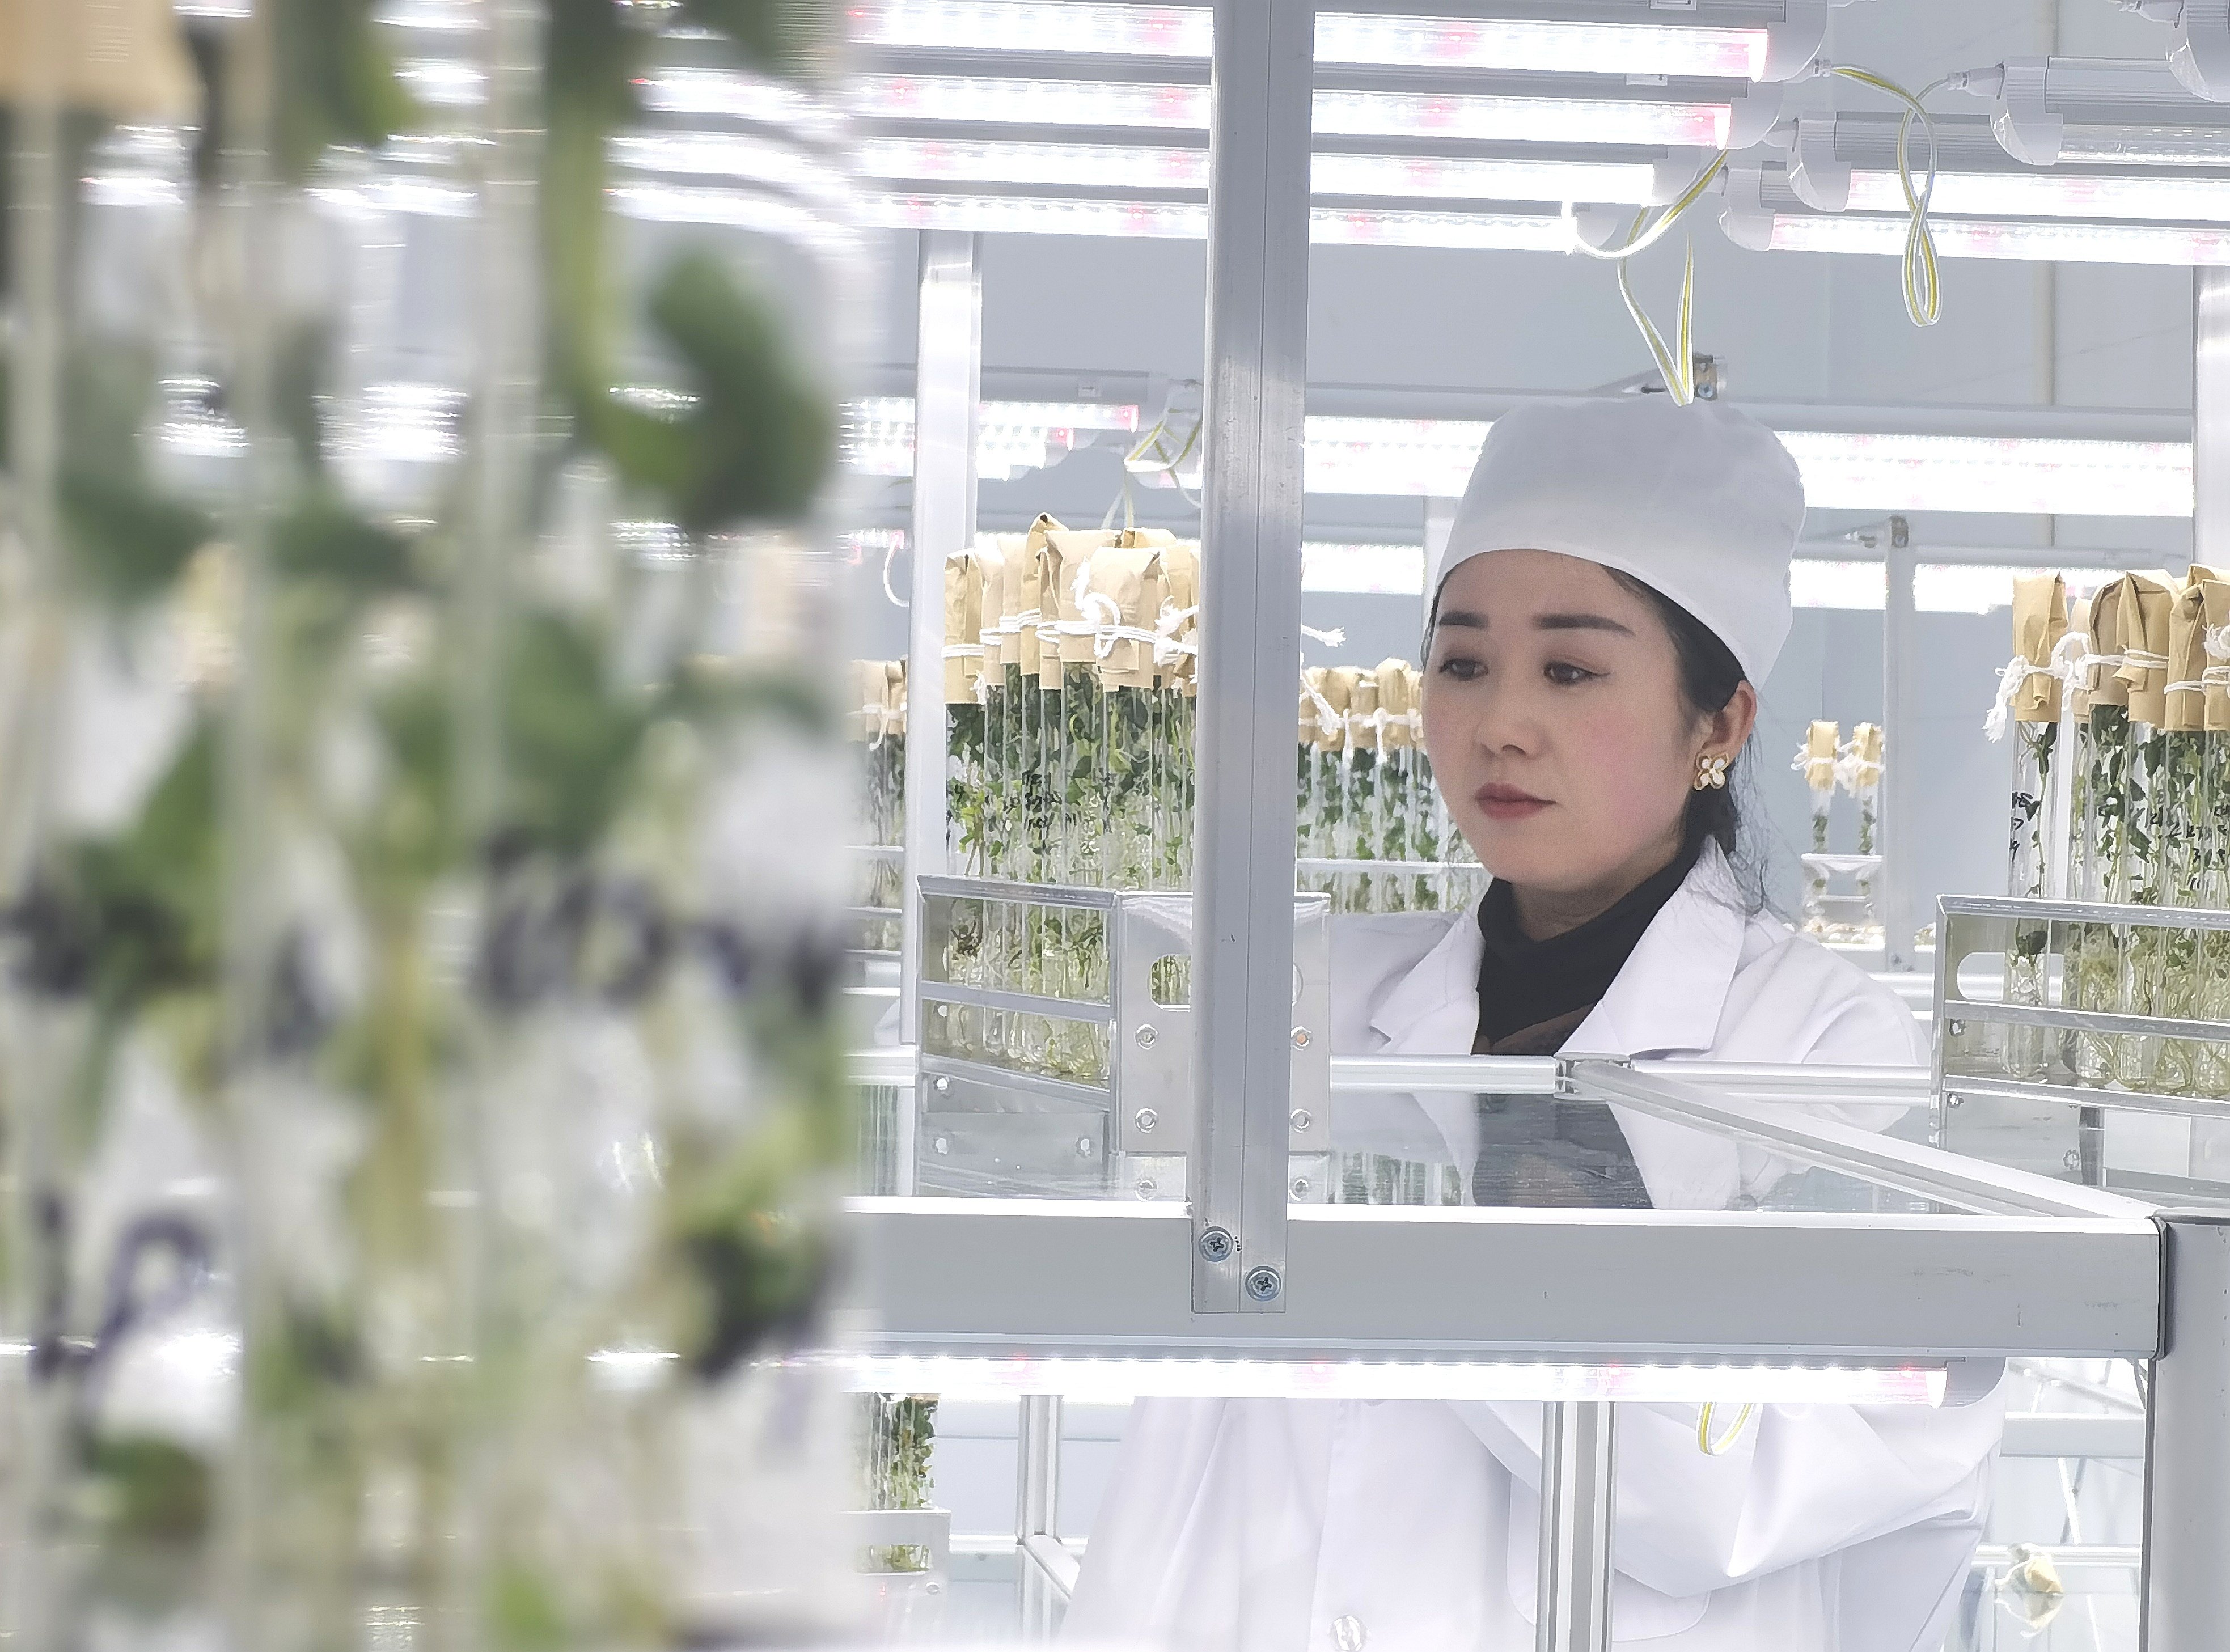 China is seen to still lags behind major seed giants such as the US and Germany, which have formed complete industry chains spanning from seed cultivation to sales. Photo: Xinhua